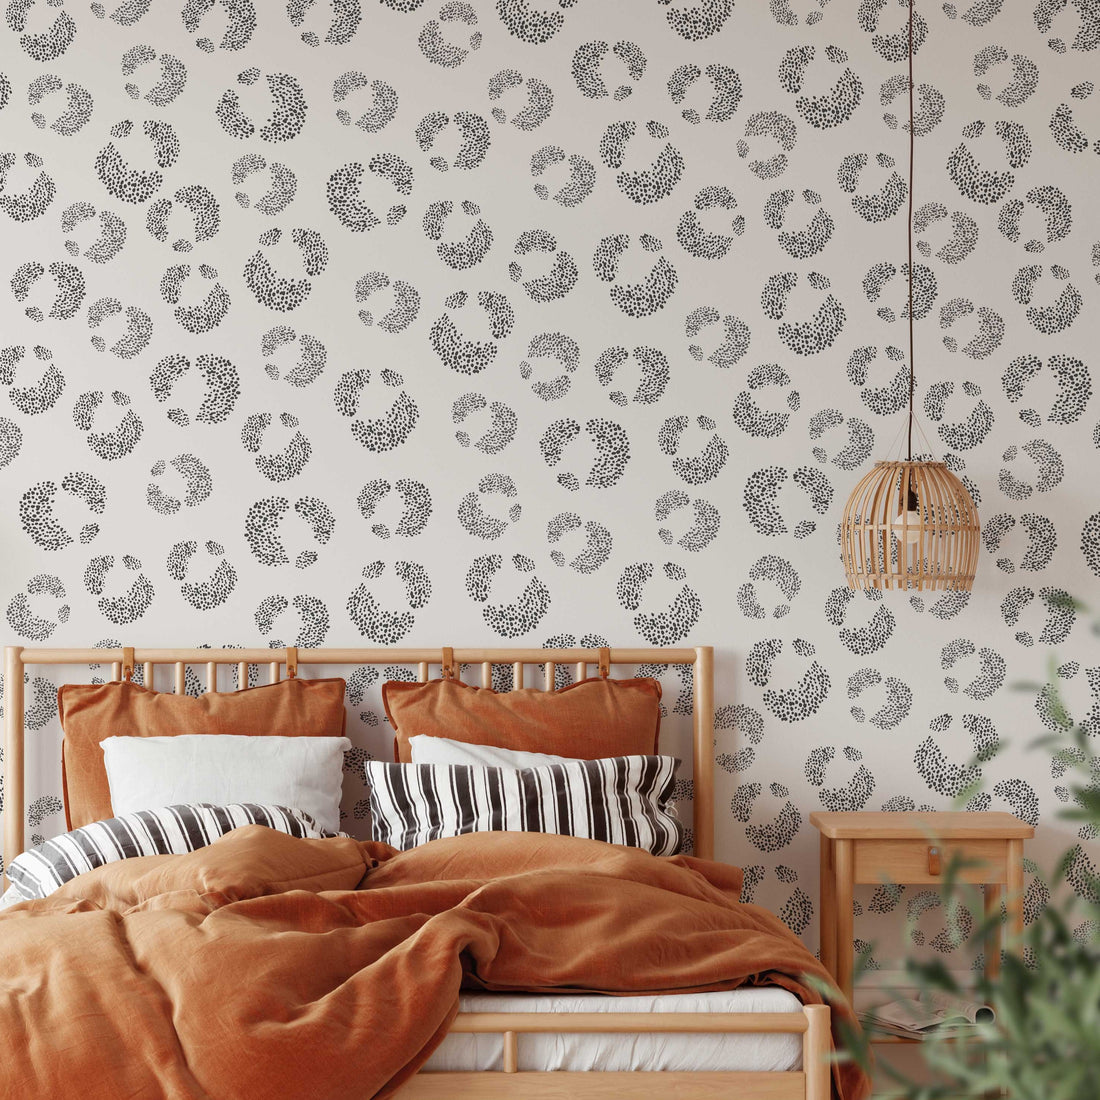 Hallie Leopard Print Wallpaper Repeat Pattern | Charcoal - Munks and Me Wallpaper